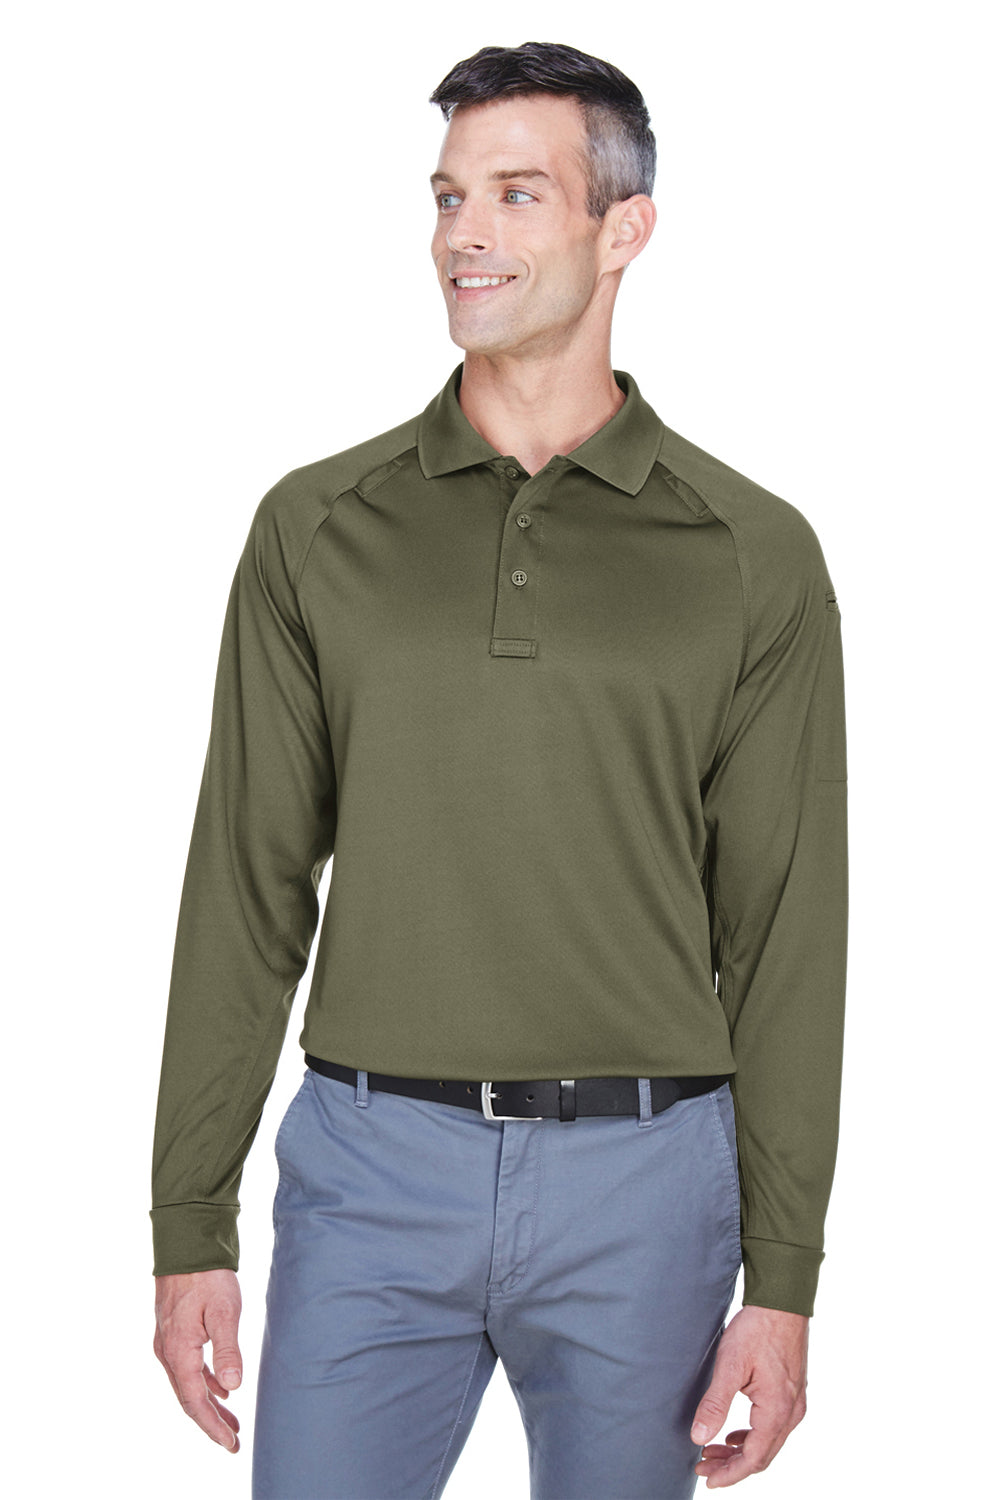 Harriton M211L Mens Advantage Tactical Moisture Wicking Long Sleeve Polo Shirt Tactical Green Front